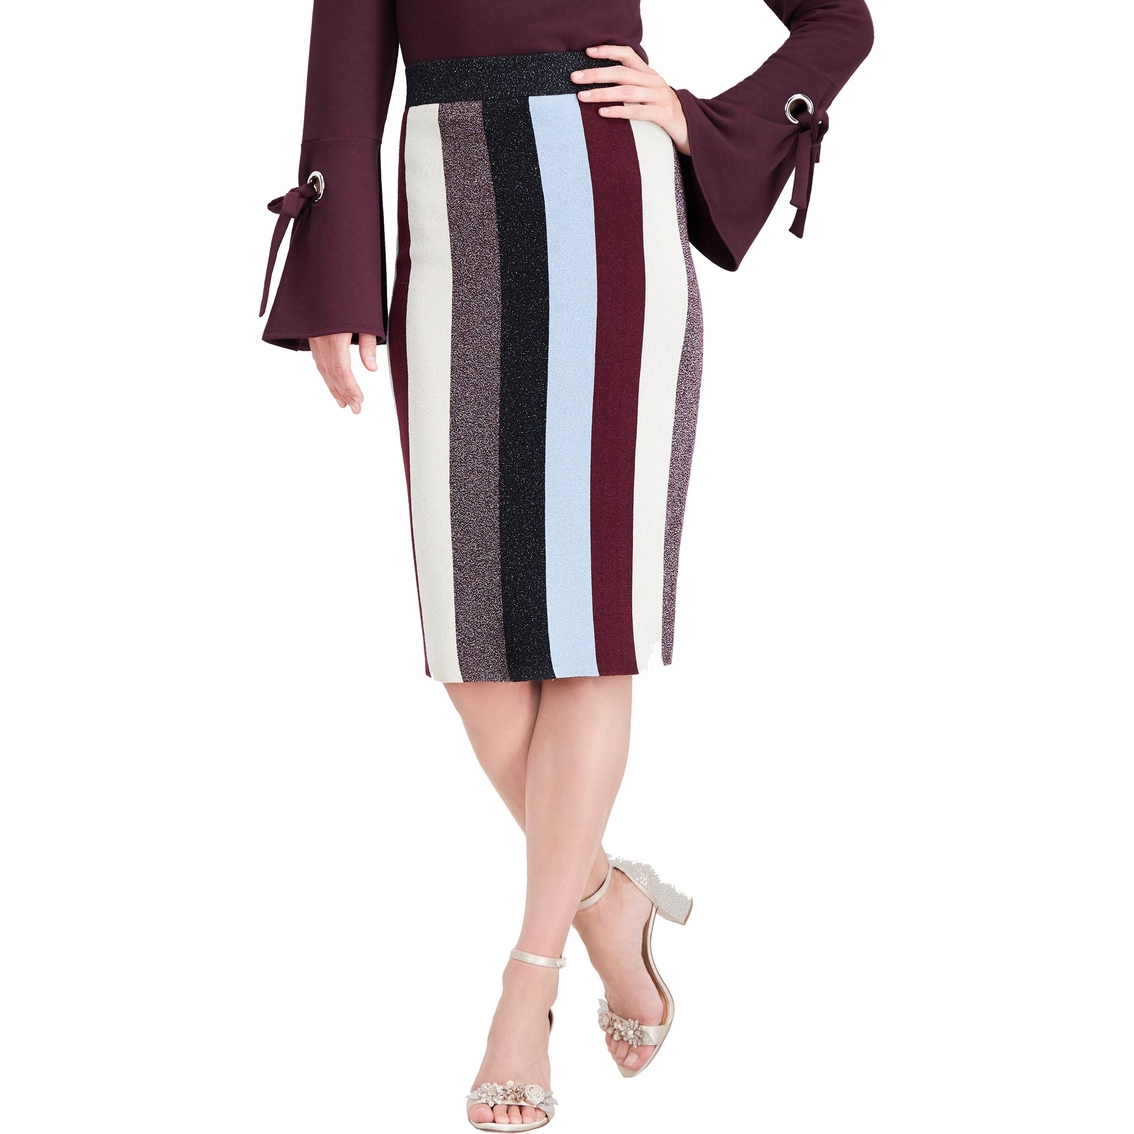 Inc International Concepts Striped Pencil Skirt | Skirts | Shop The ...